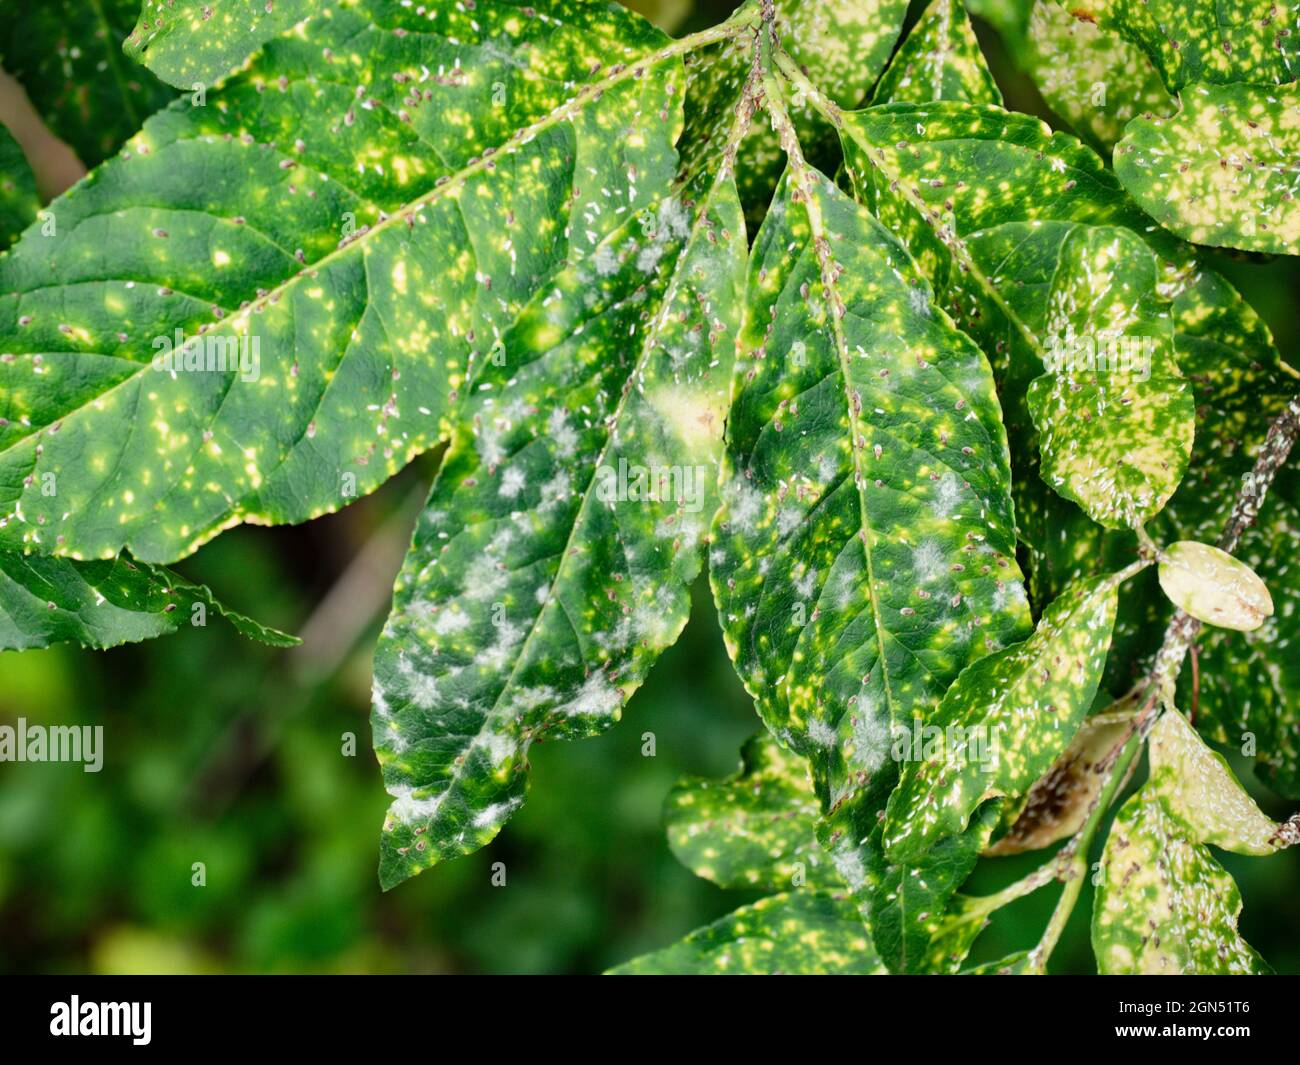 Defected leaves of euonymus on a branch against foliage. Problem with scale insects. Stock Photo